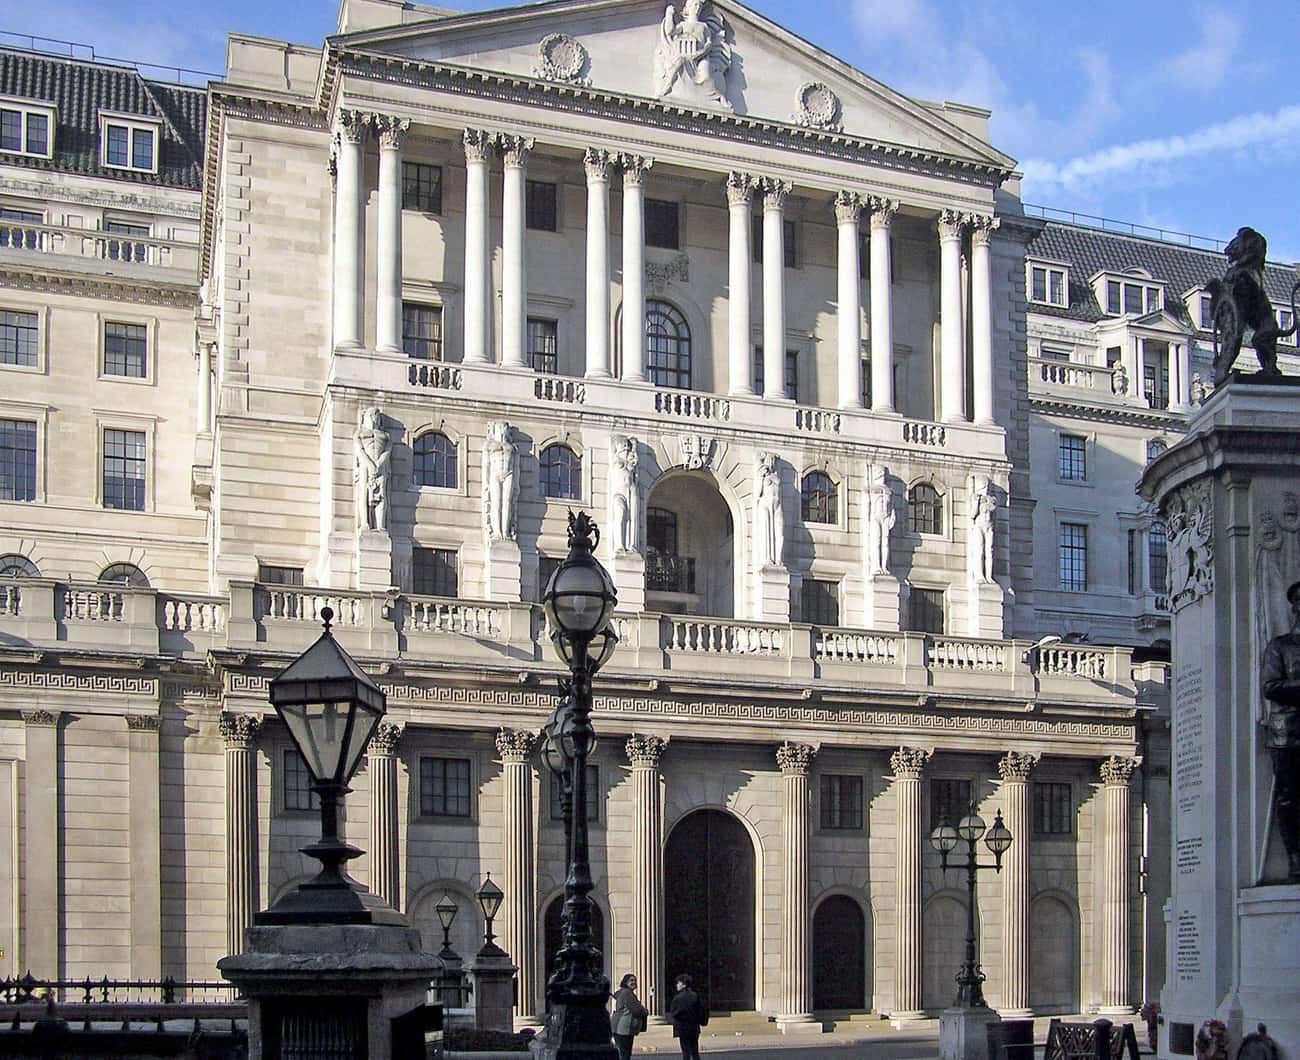 A Sewage Worker Broke Into The Bank Of England Gold Vault Just To Tell The Directors It Was Possible